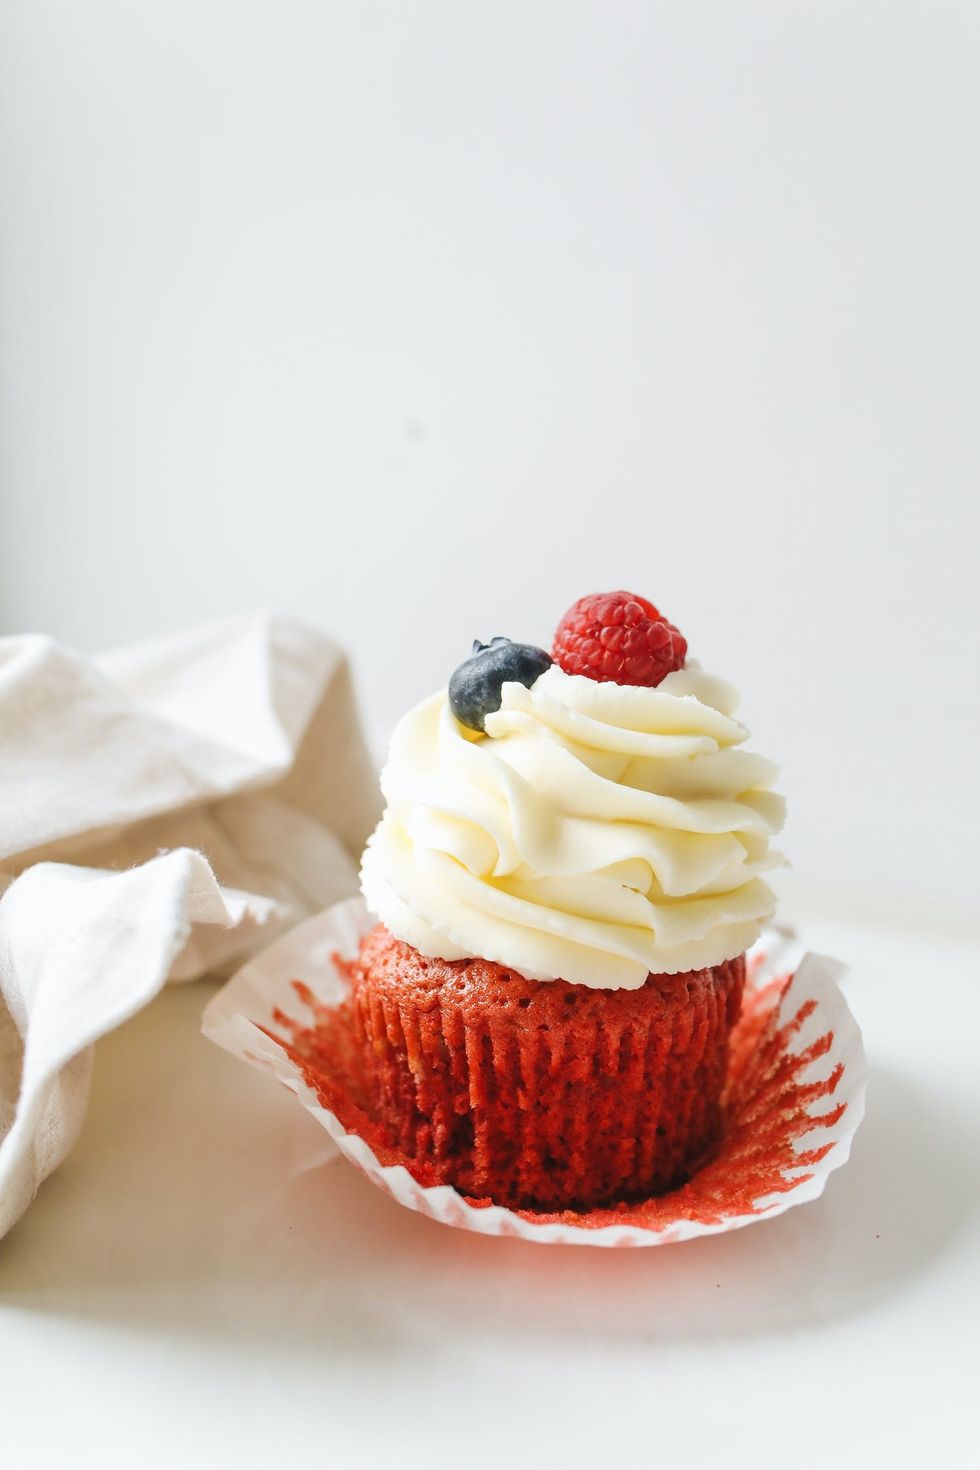 9 Easy Pinterest Cupcake Recipes To Try At Home